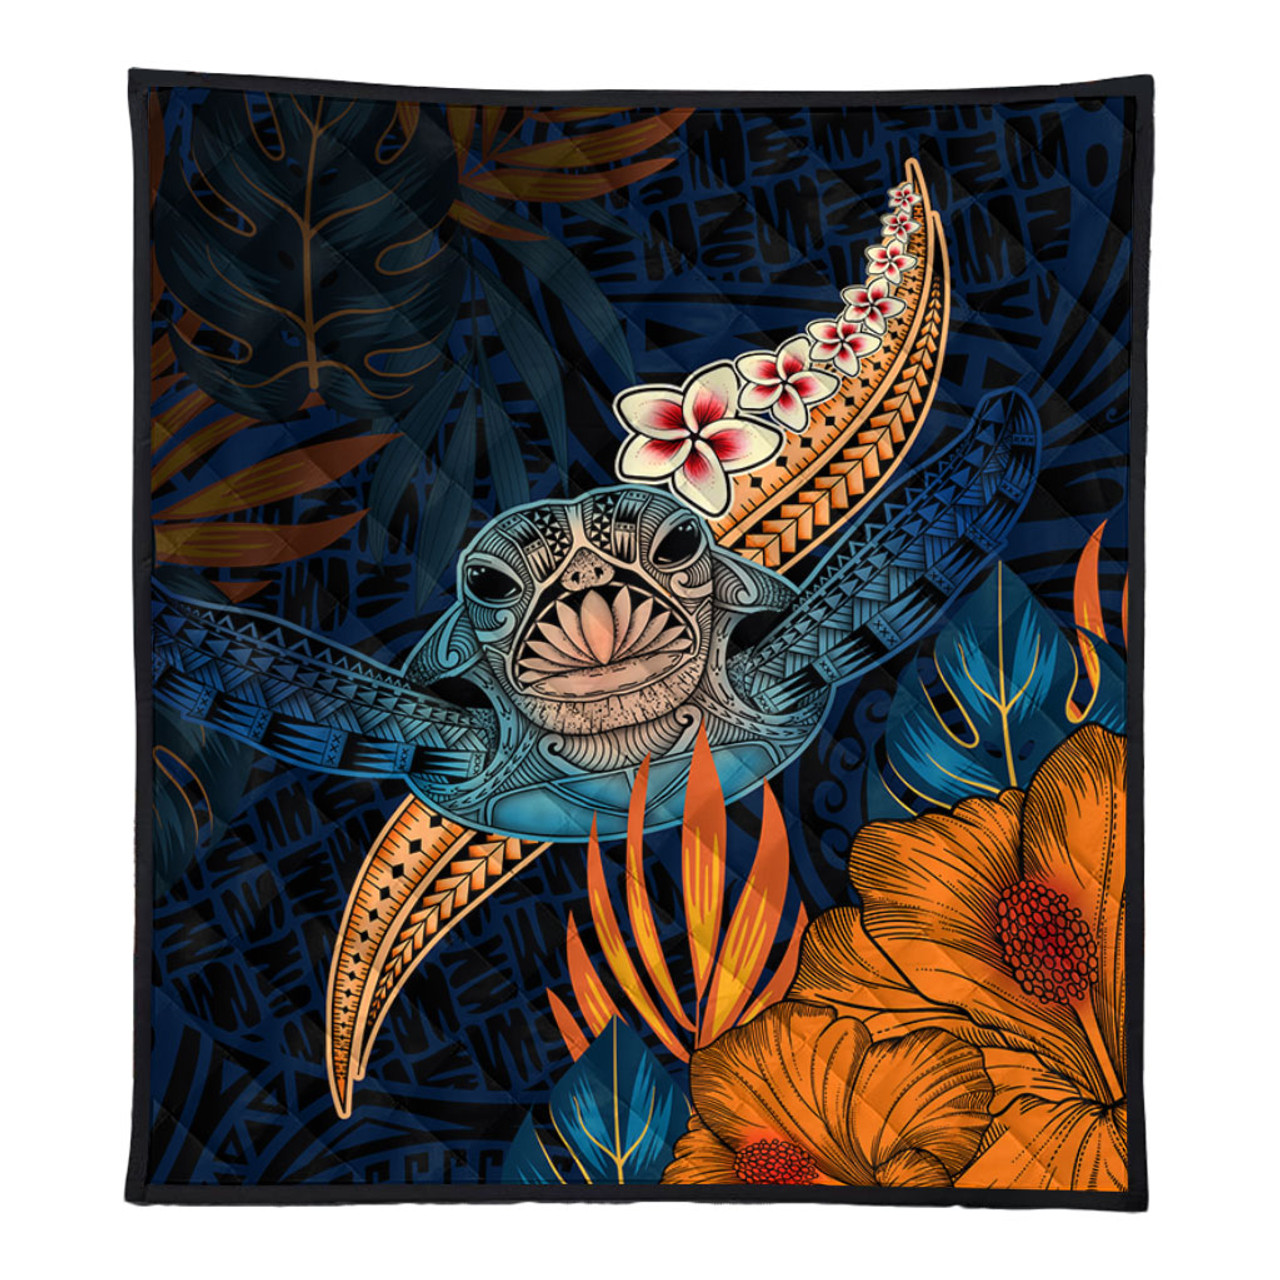 Hawaii Premium Quilt Turtle Design With Hibiscus Tropical Style